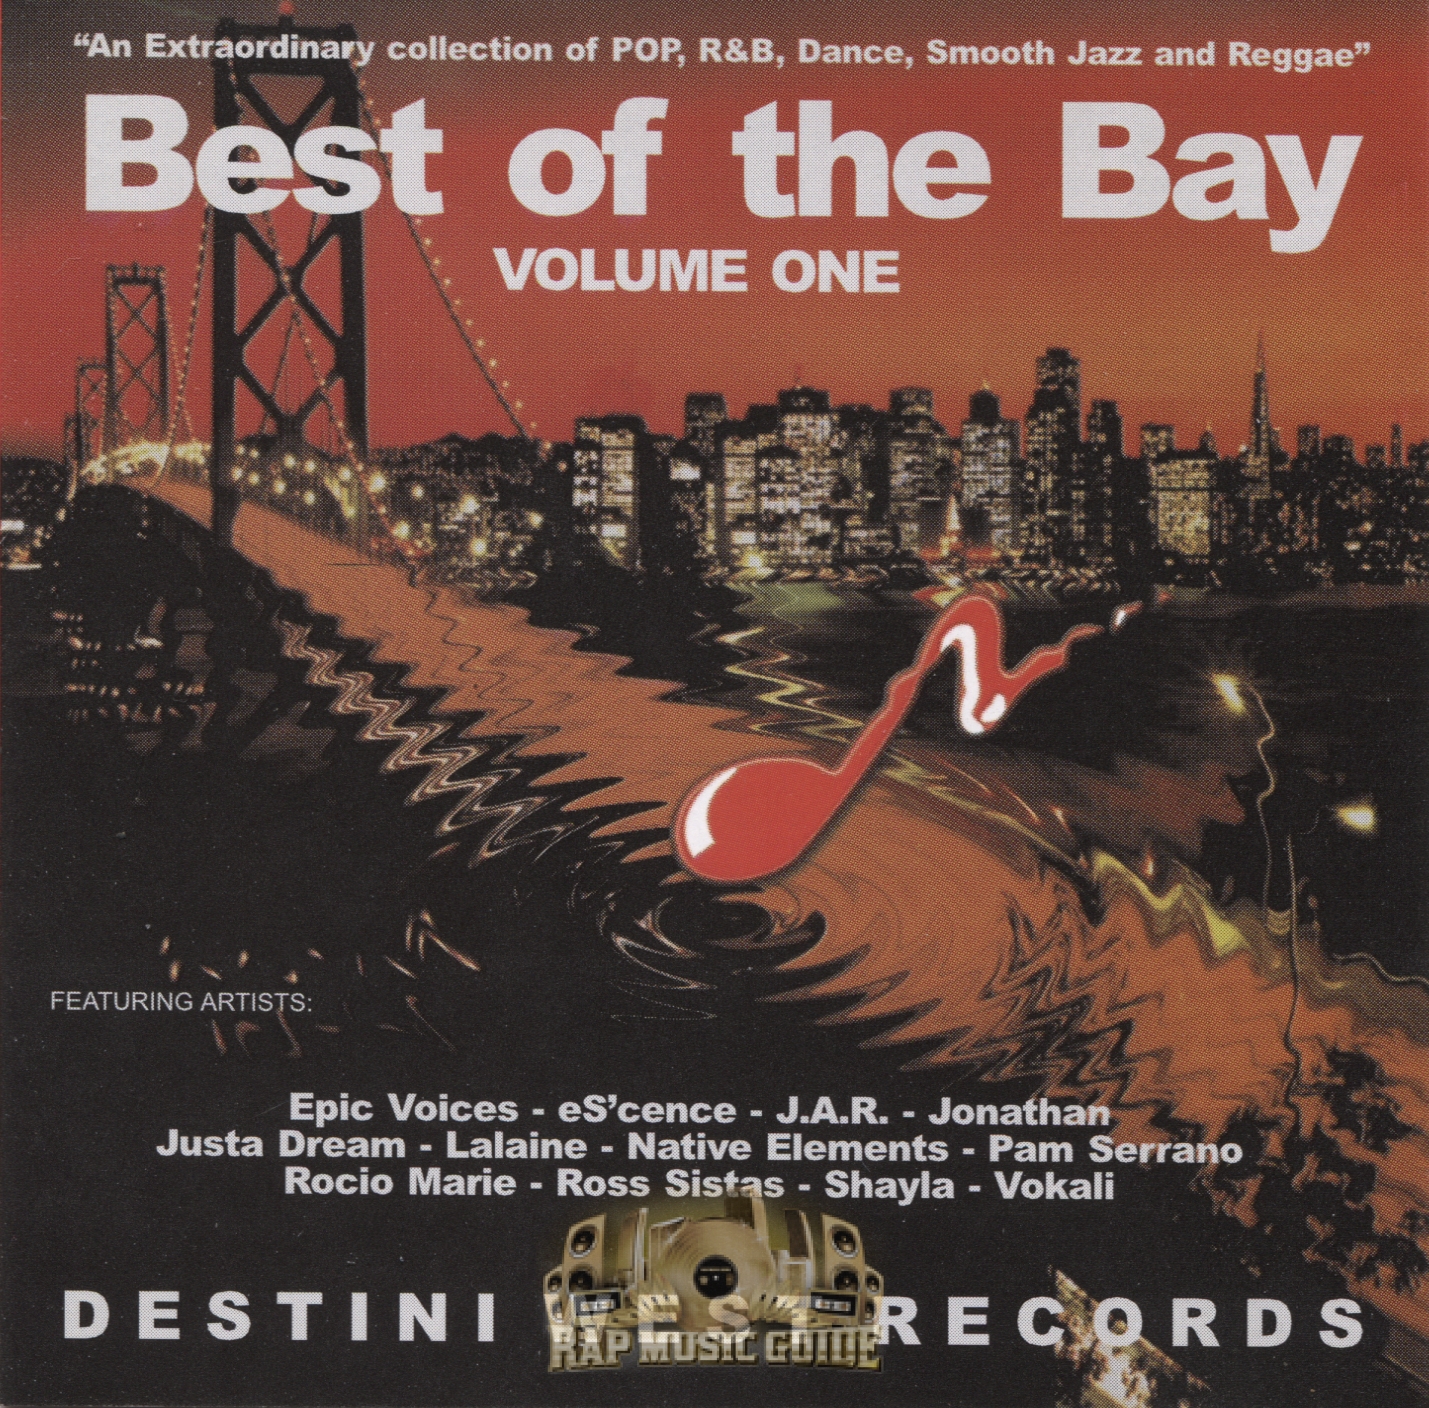 Best Of The Bay Volume One CD Rap Music Guide